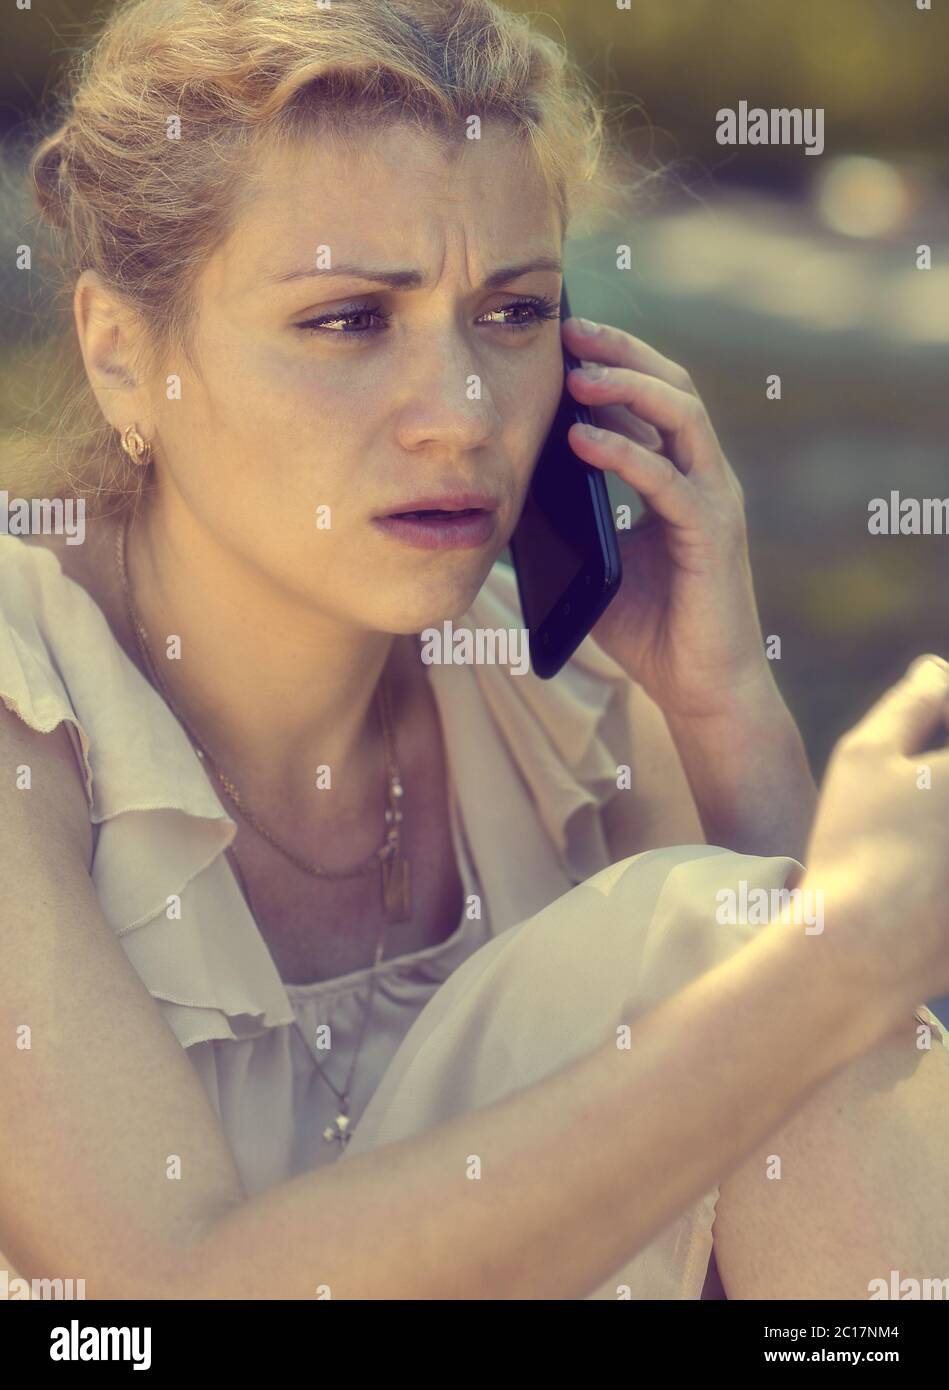 Girl talking on phone and being shocked Stock Photo